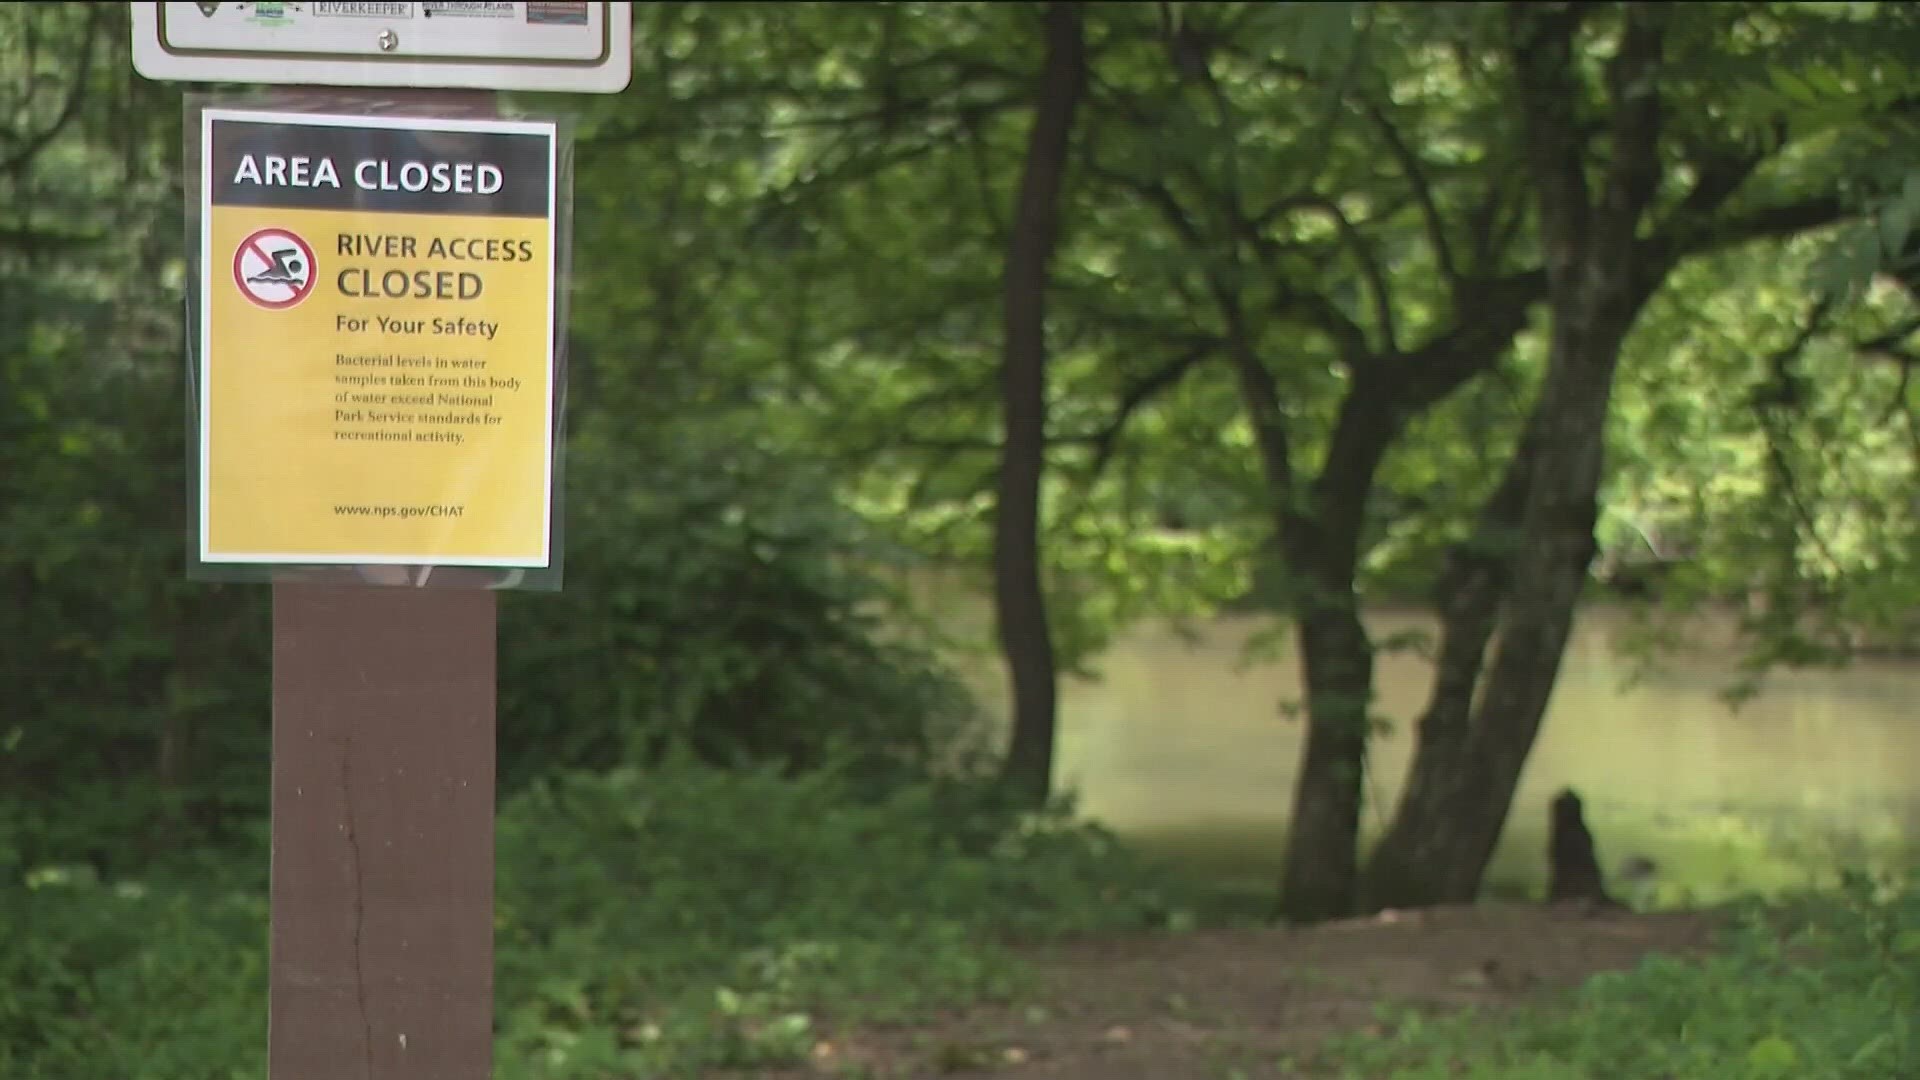 Park authorities noted that the river is still closed from the Nature Center to Powers Island.